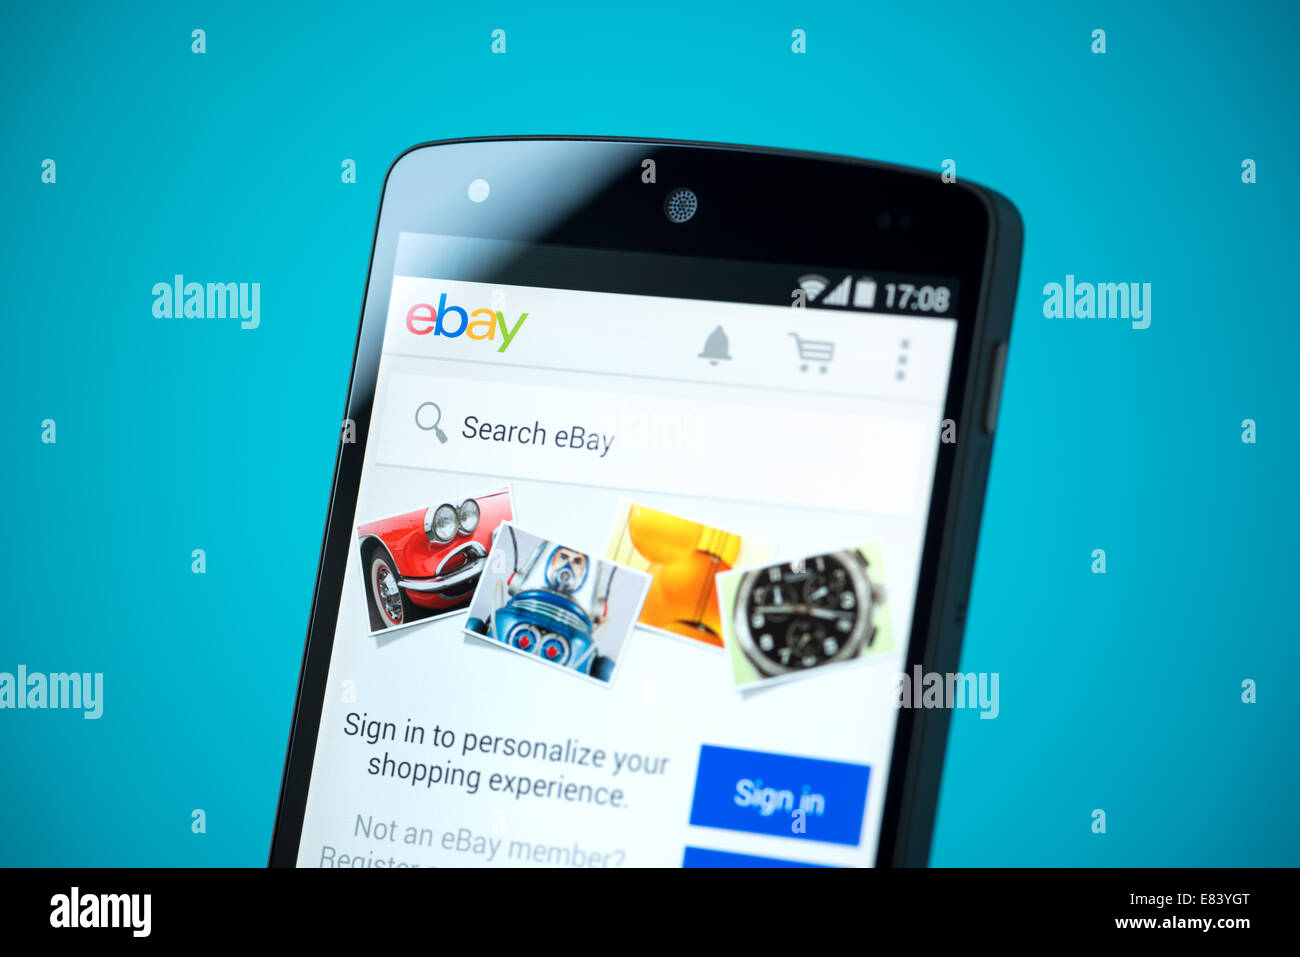 Close-up shot of brand new Google Nexus 5, powered by Android 4.4 version with eBay mobile website on a screen. Stock Photo